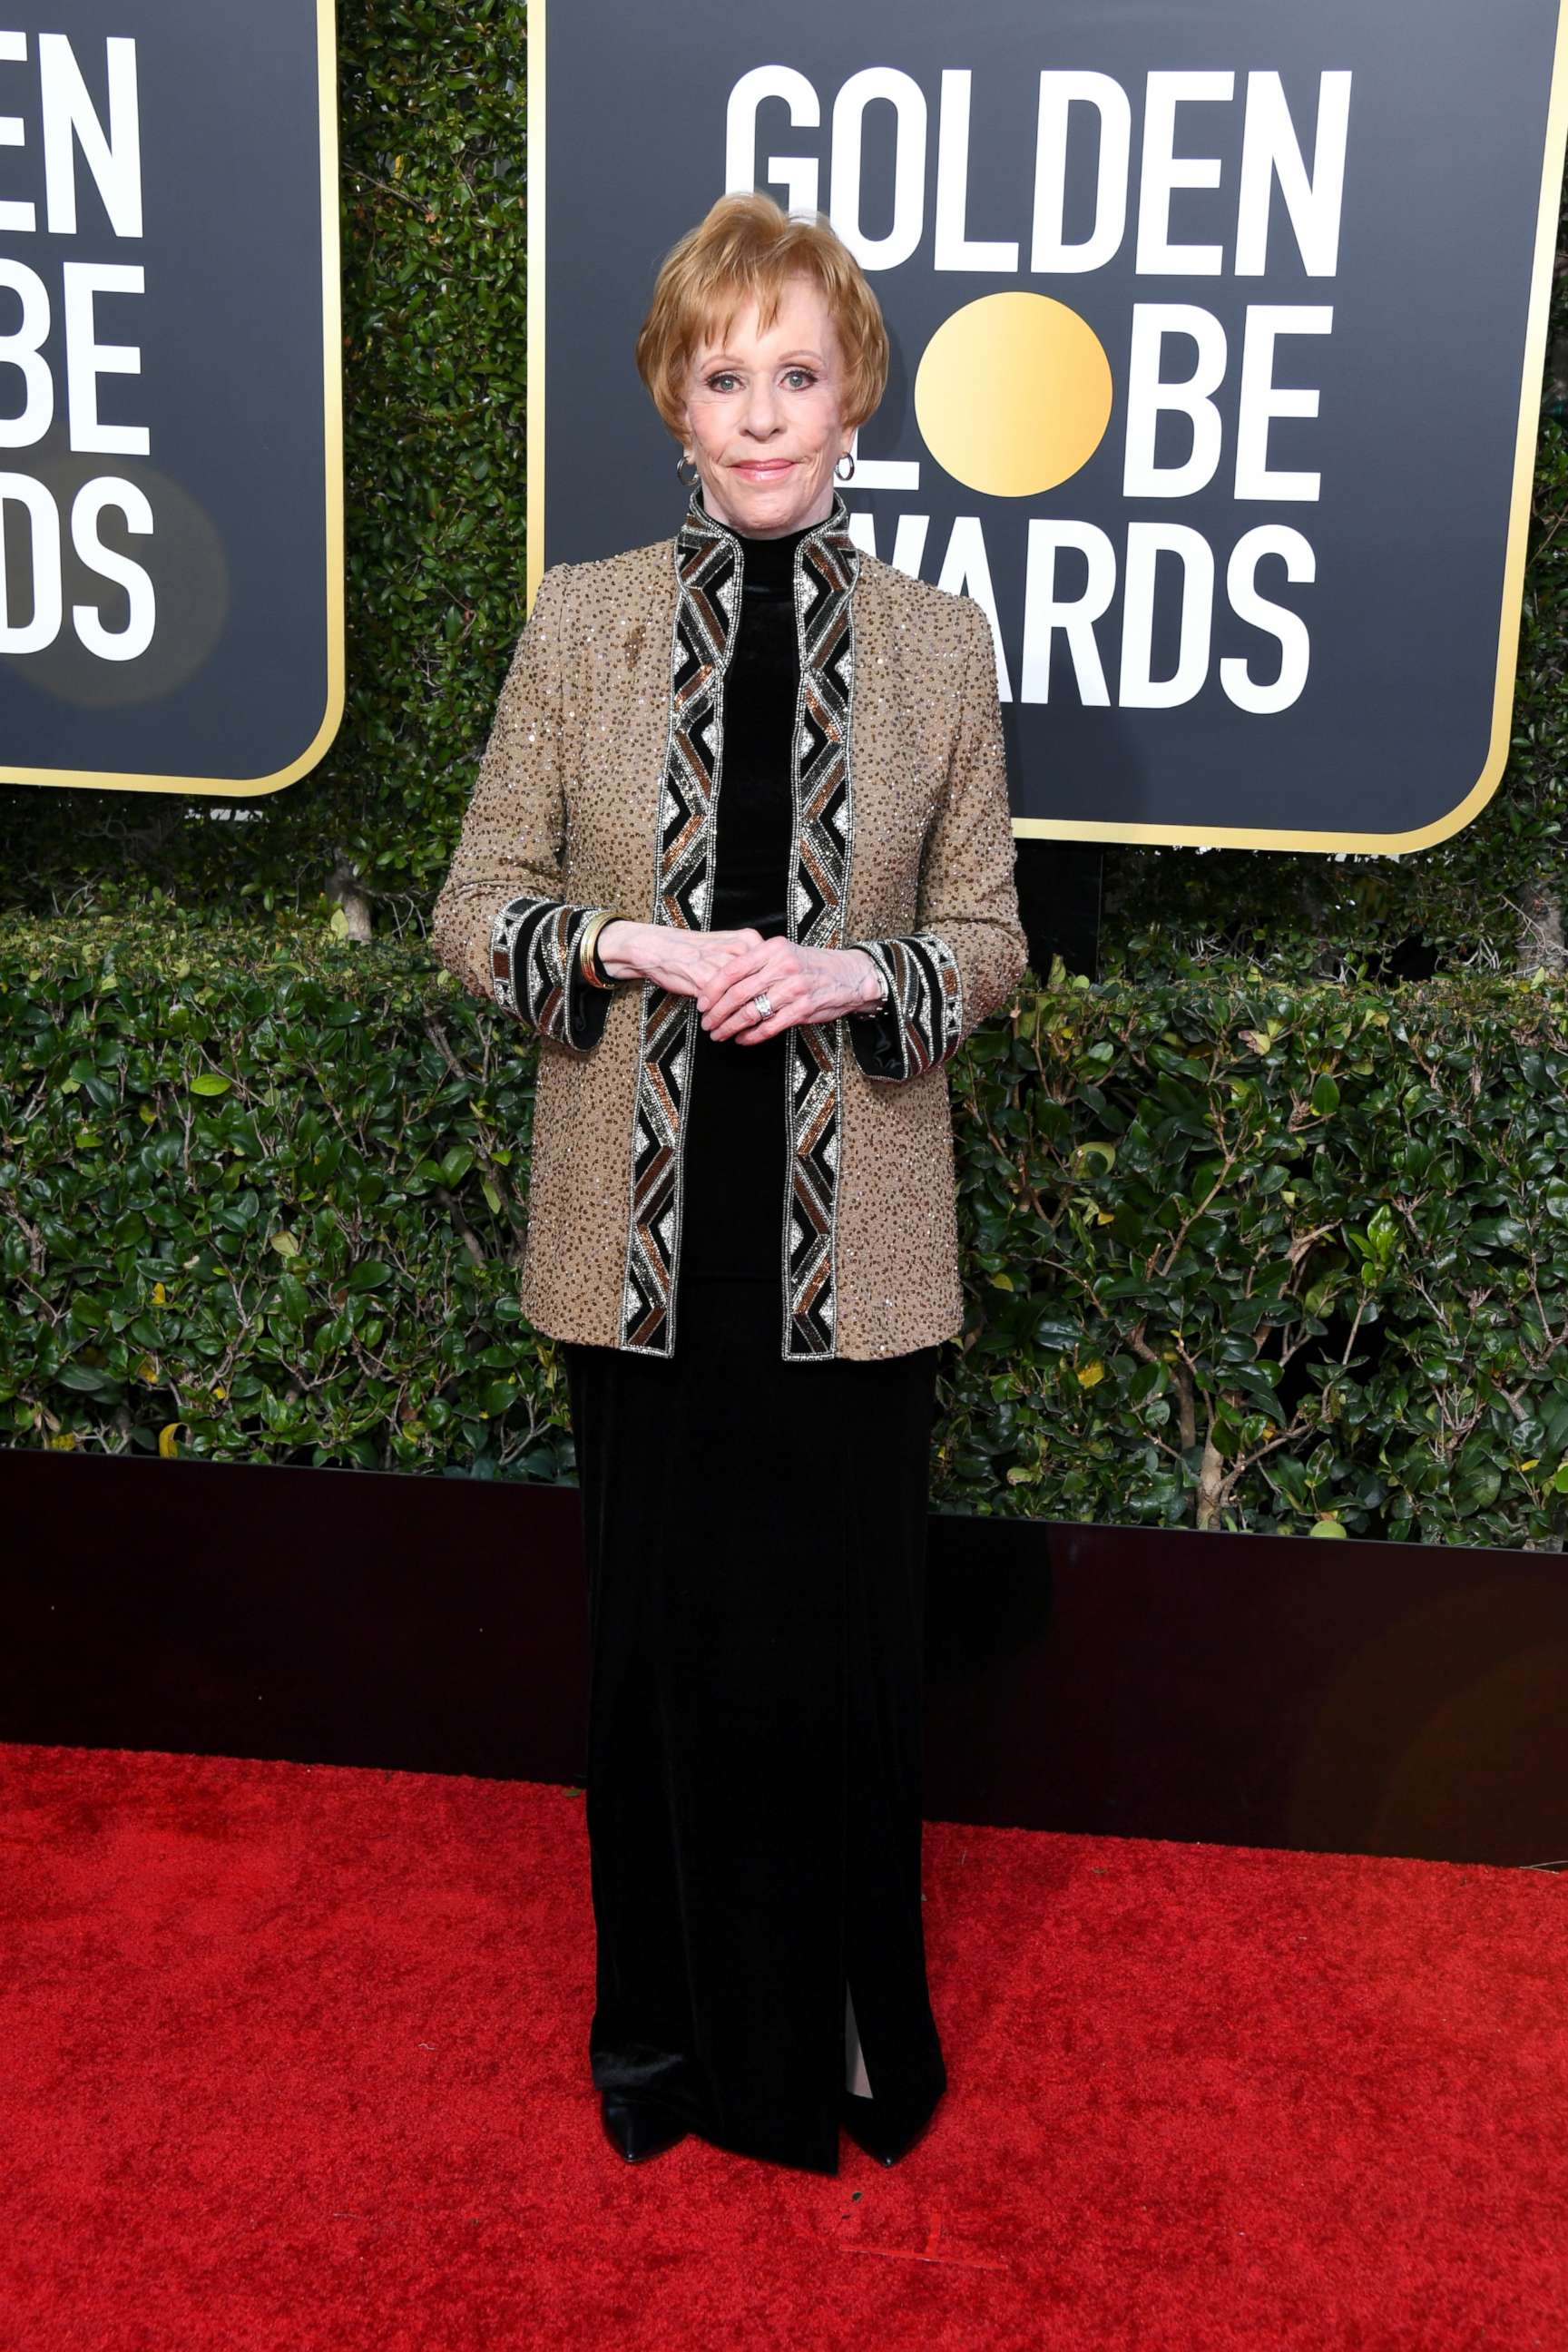 PHOTO: Carol Burnett attends the 76th annual Golden Globe awards at the Beverly Hilton Hotel, Jan. 6, 2019 in Beverly Hills, Calif.